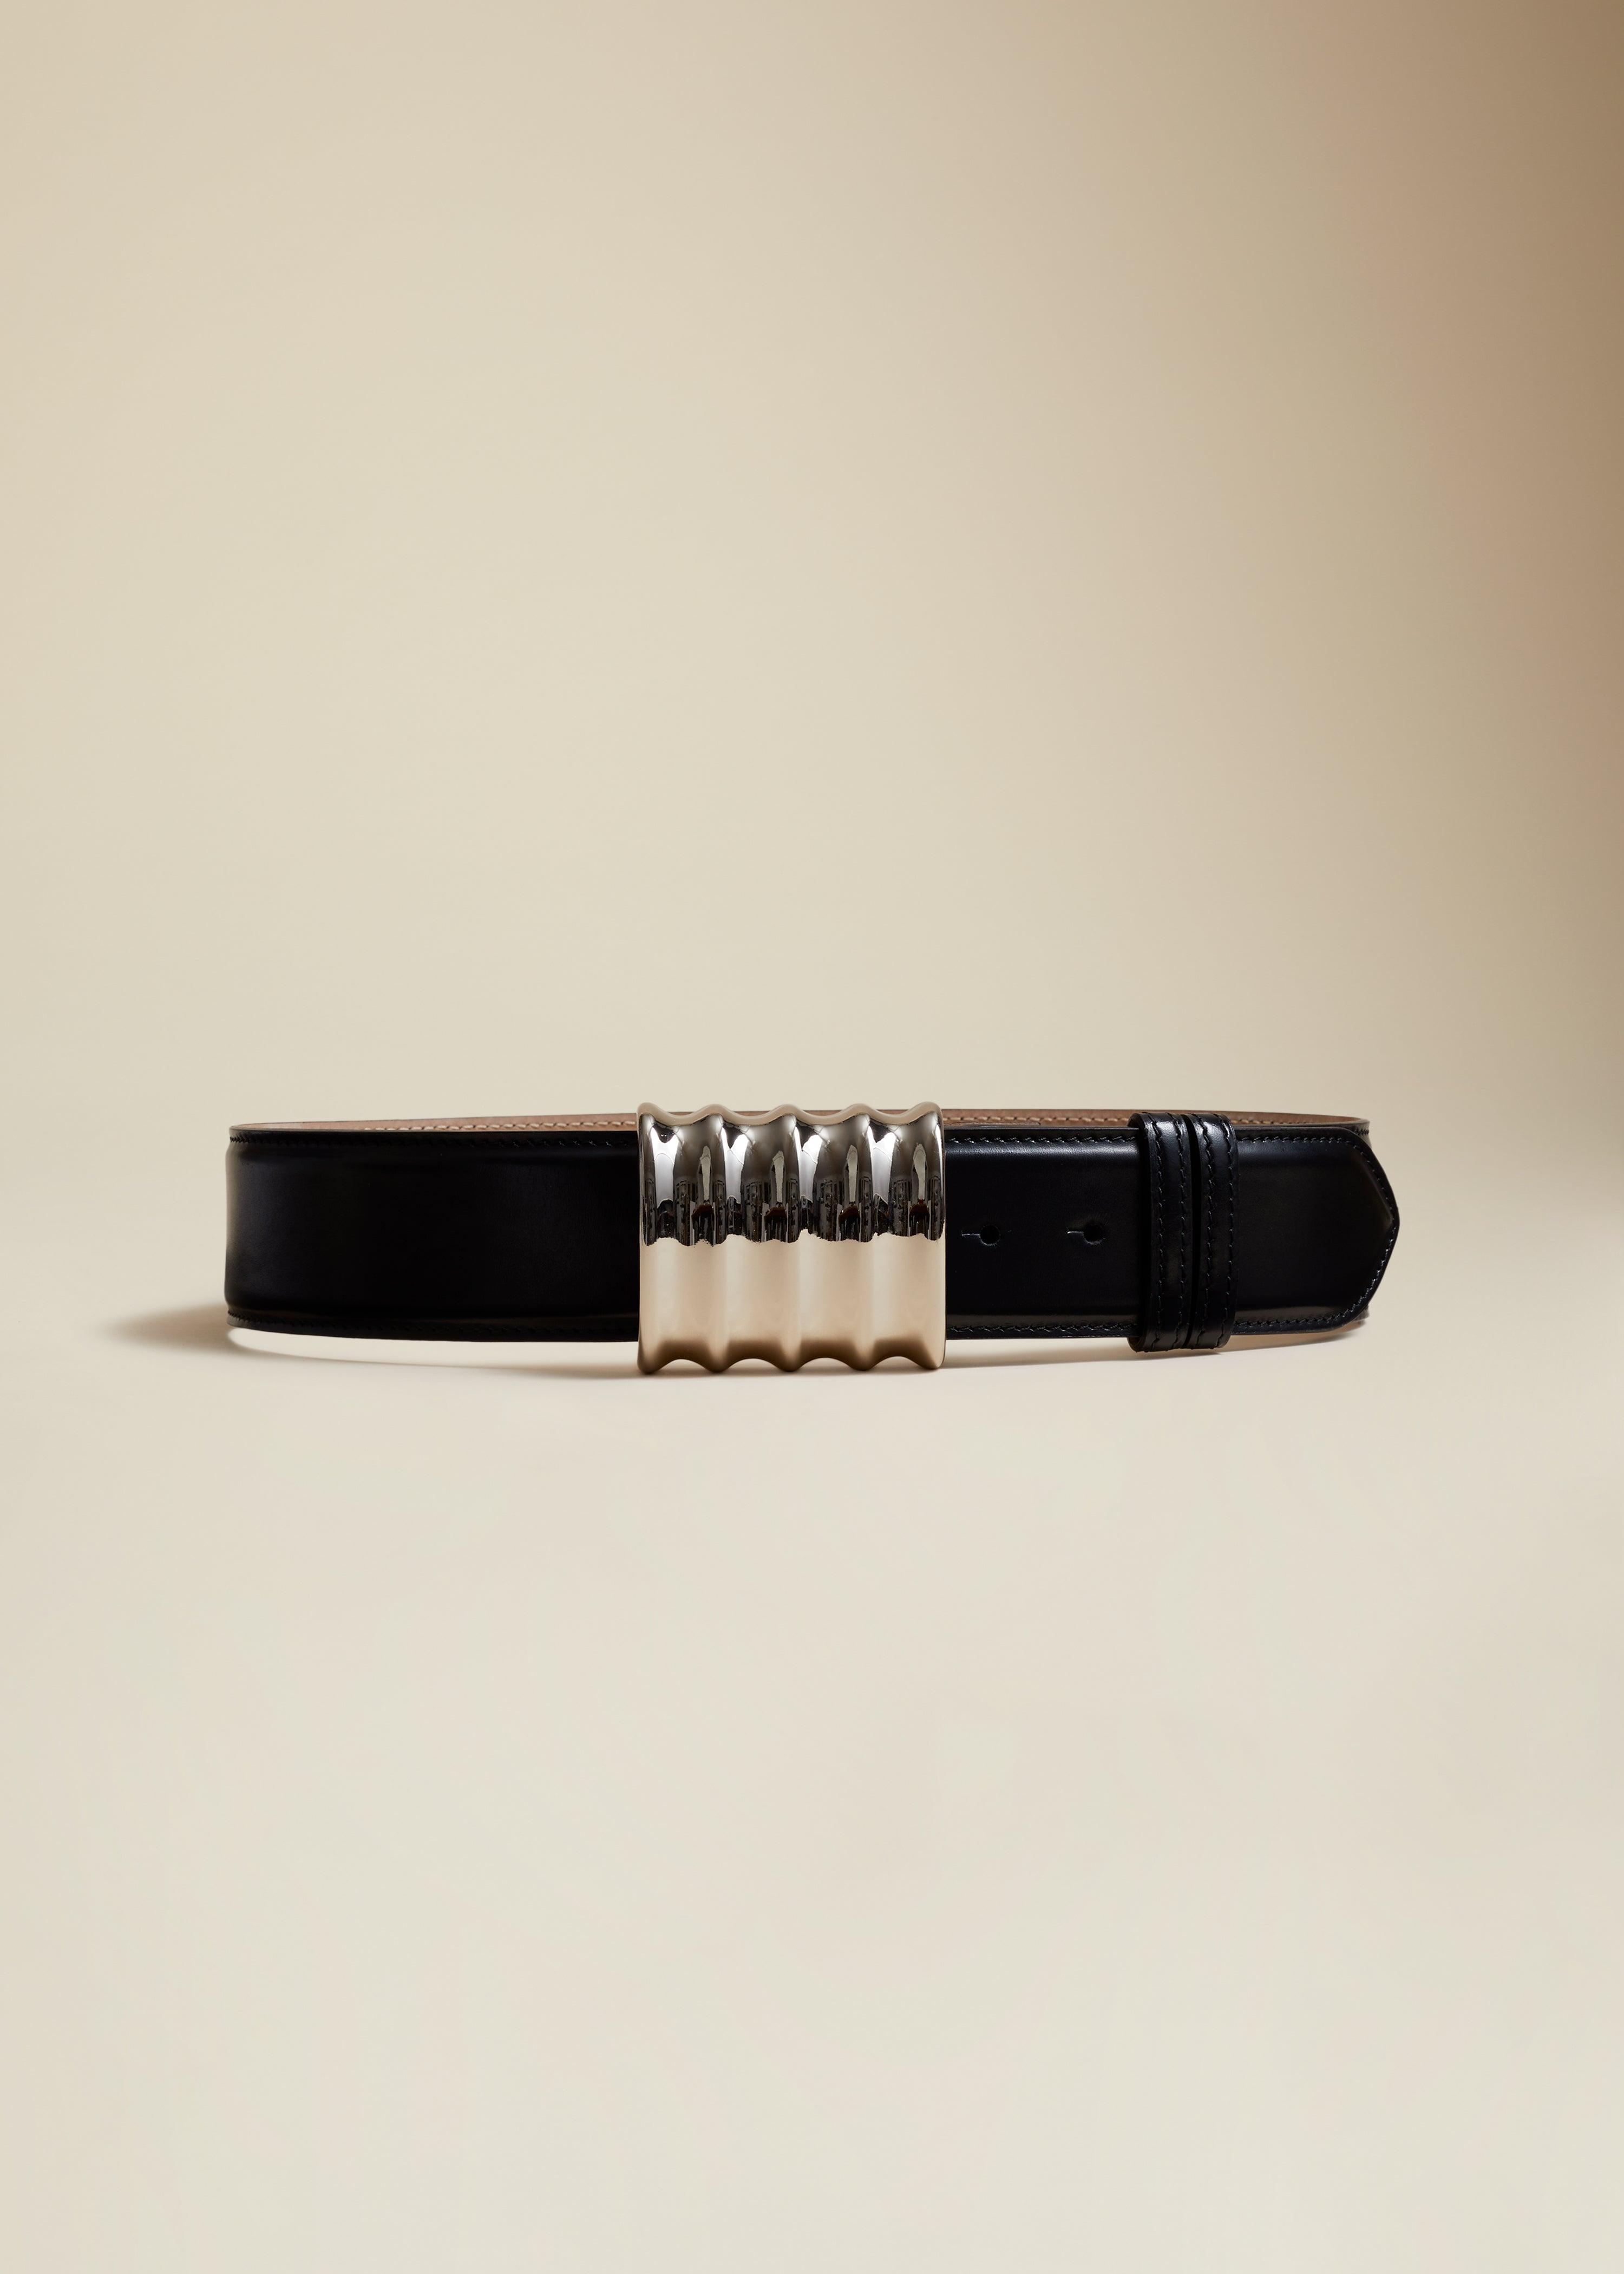 The Large Julius Belt in Black with Silver - The Iconic Issue